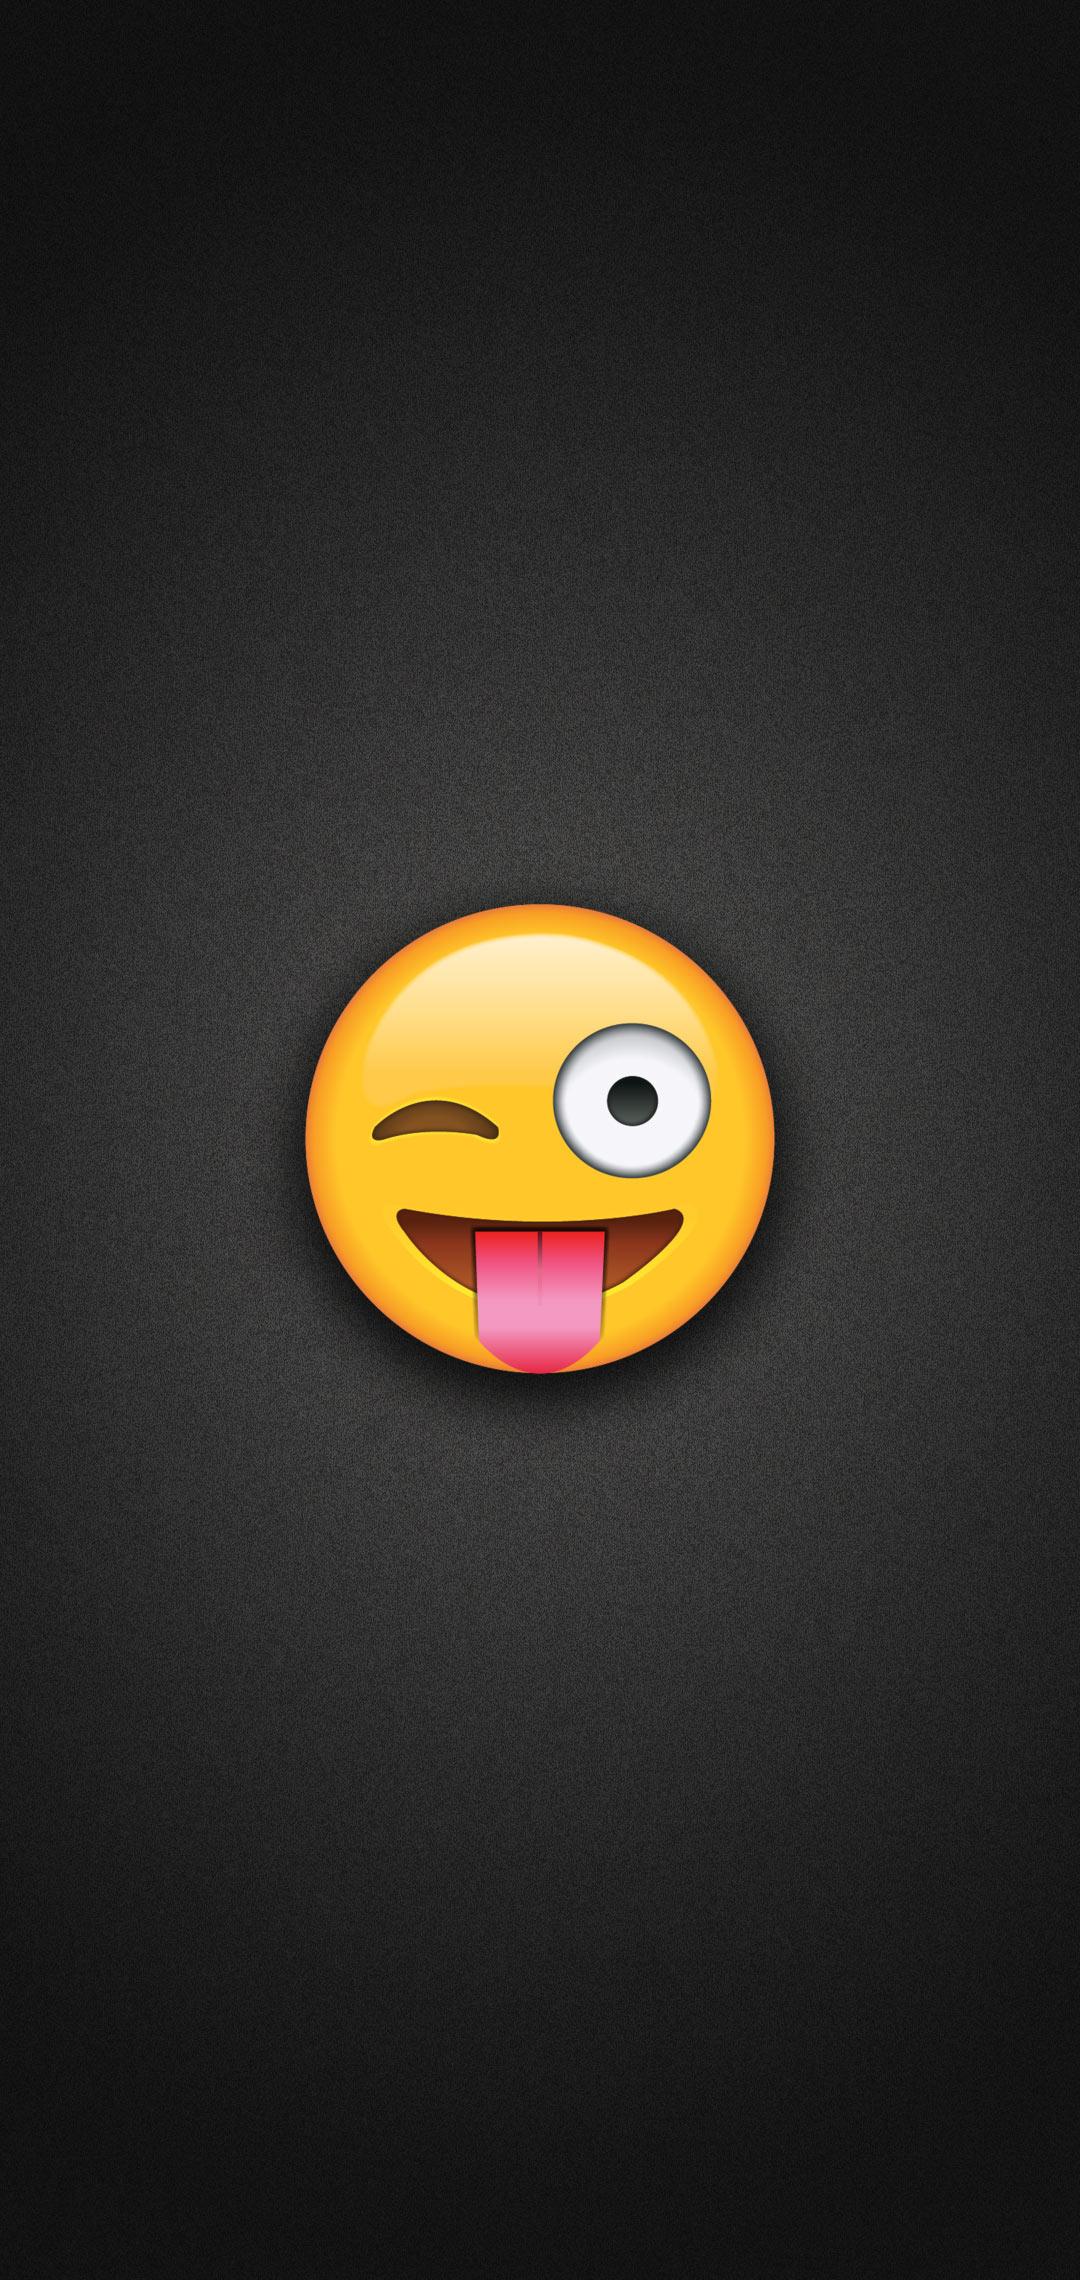 Tongue Out Emoji with Winking Eye Phone Wallpaper